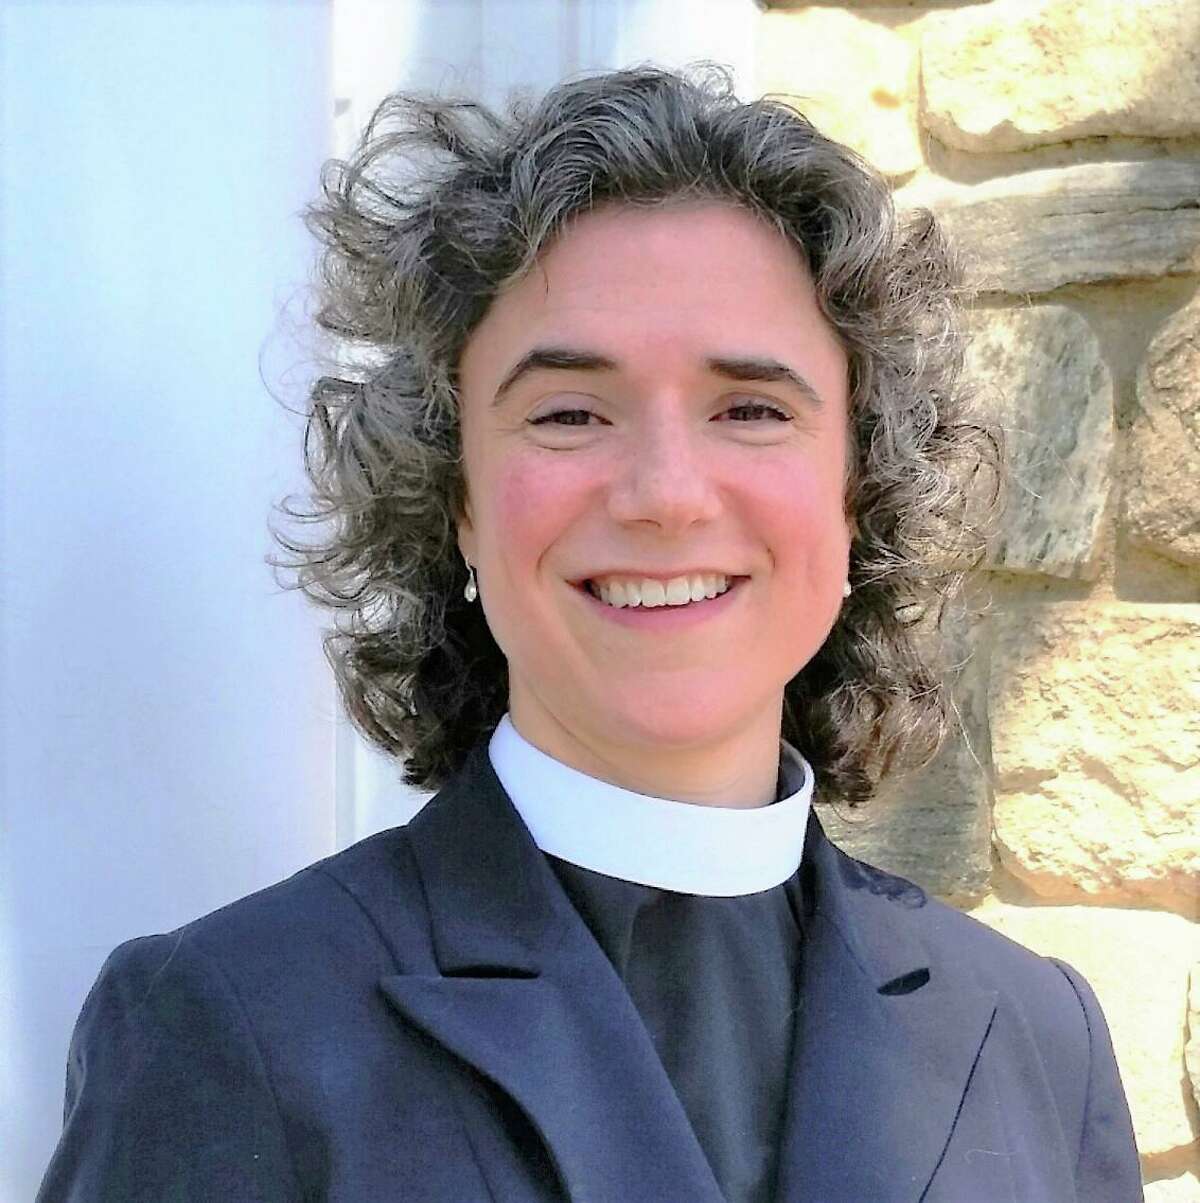 The Rev. Whitney Altopp will sing two duets with Thomas Carr, bass, at the May 31 hymn sing.